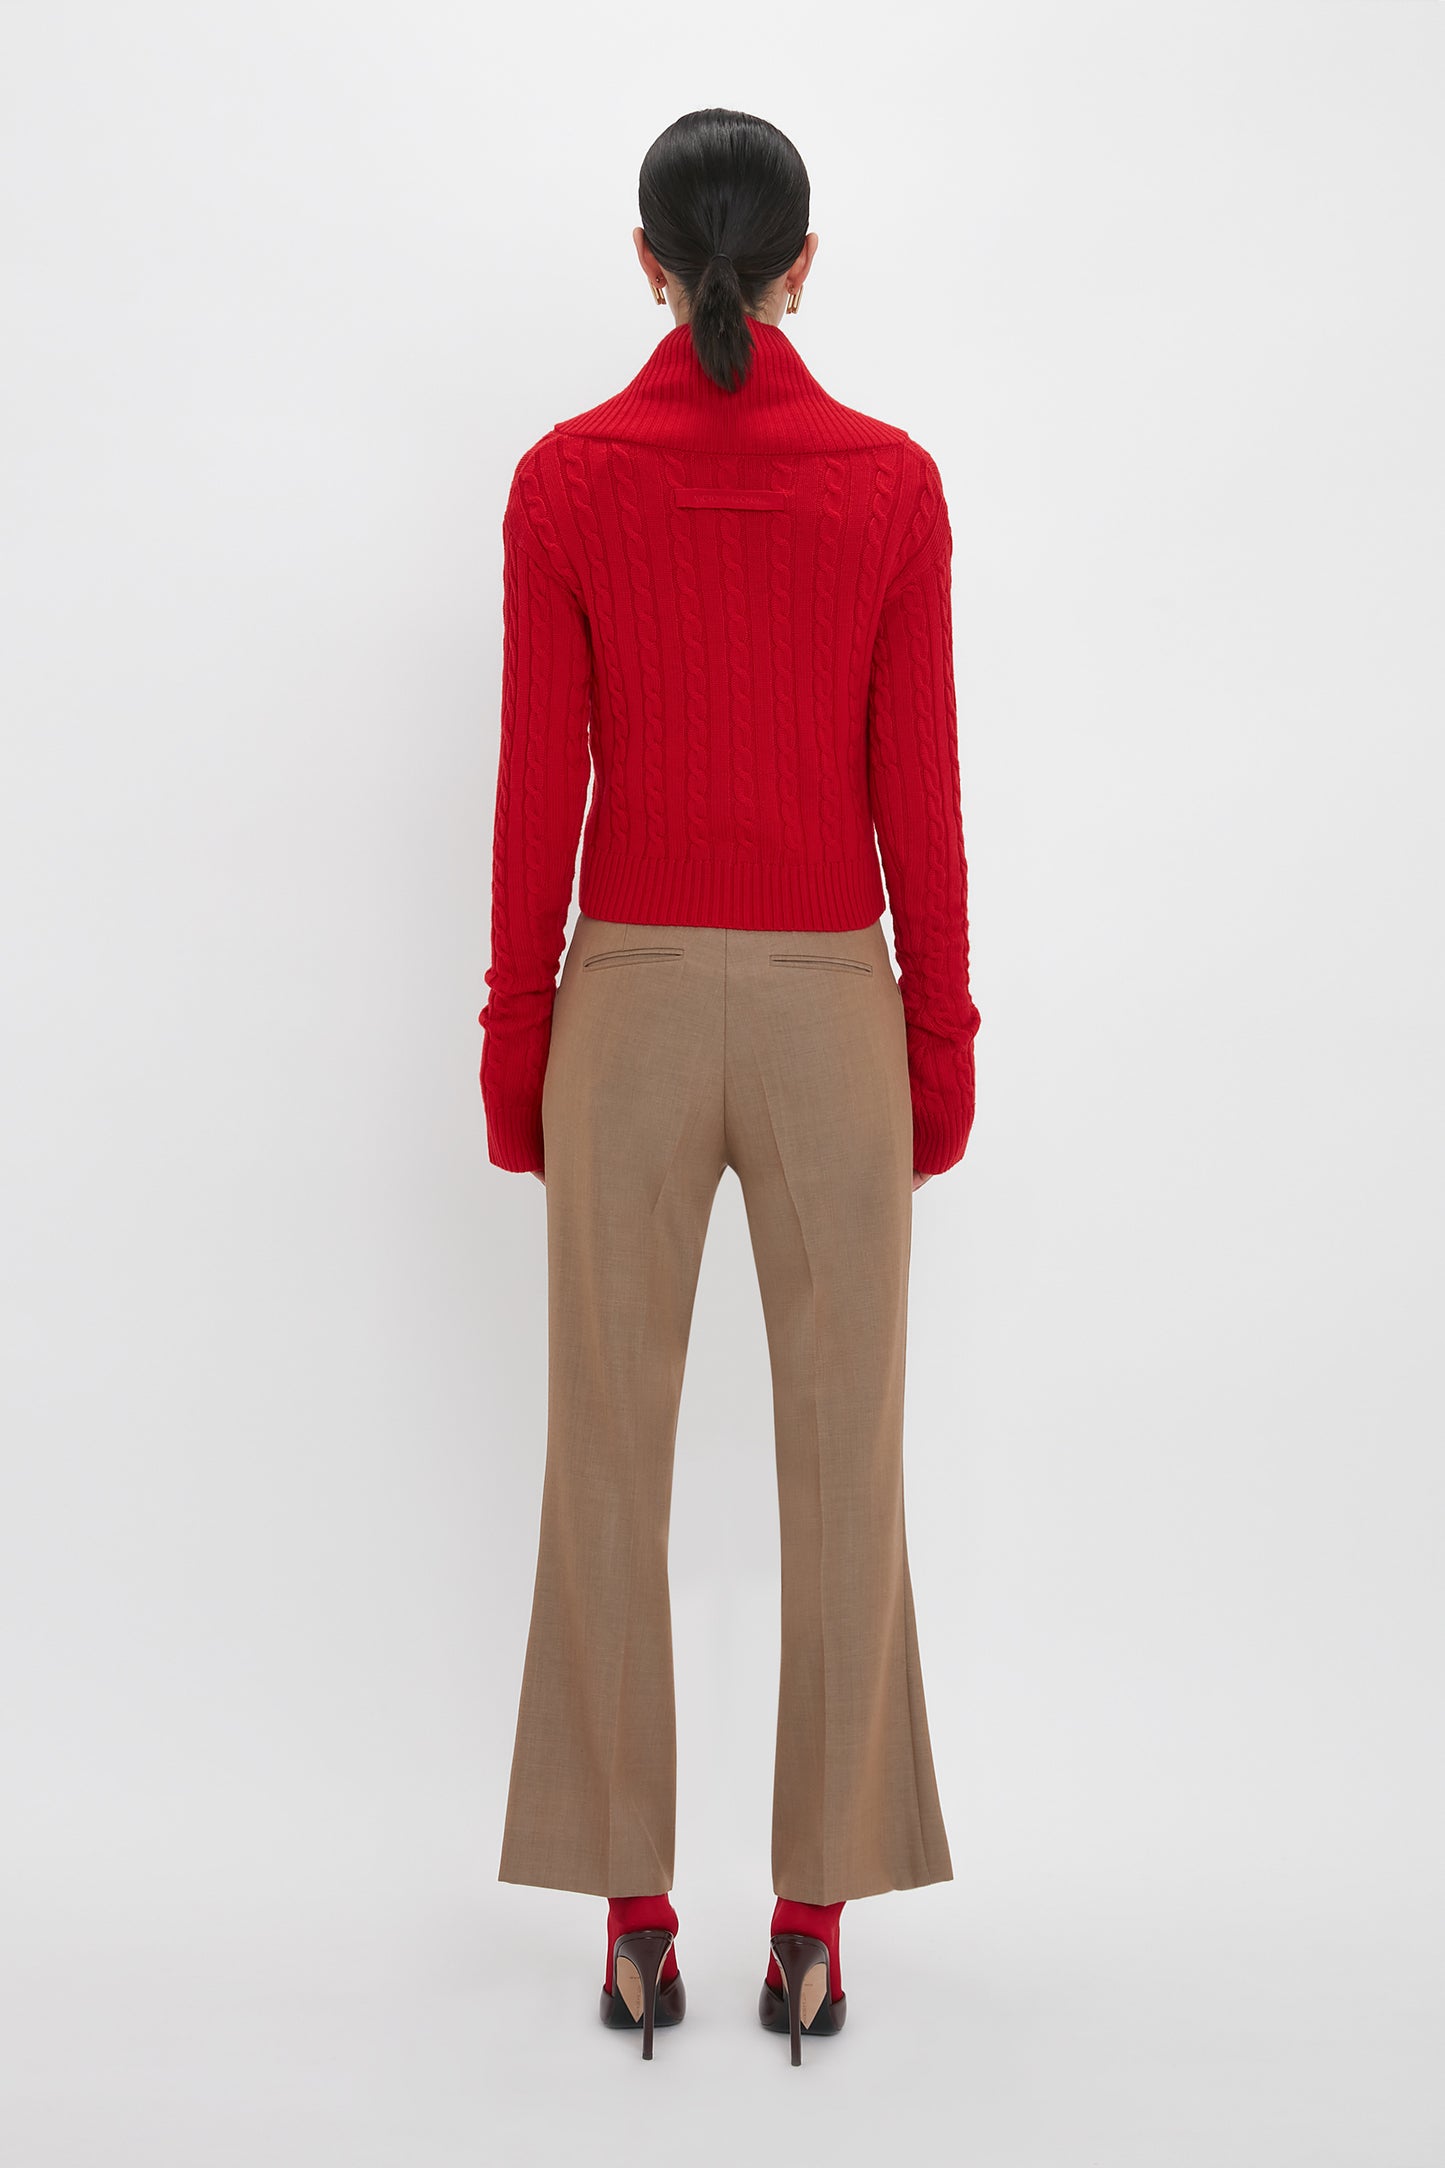 A person with dark hair in a ponytail is standing with their back to the camera, wearing a luxurious Wrap Detail Jumper In Red by Victoria Beckham, beige trousers, red socks, and black heels against a white background.